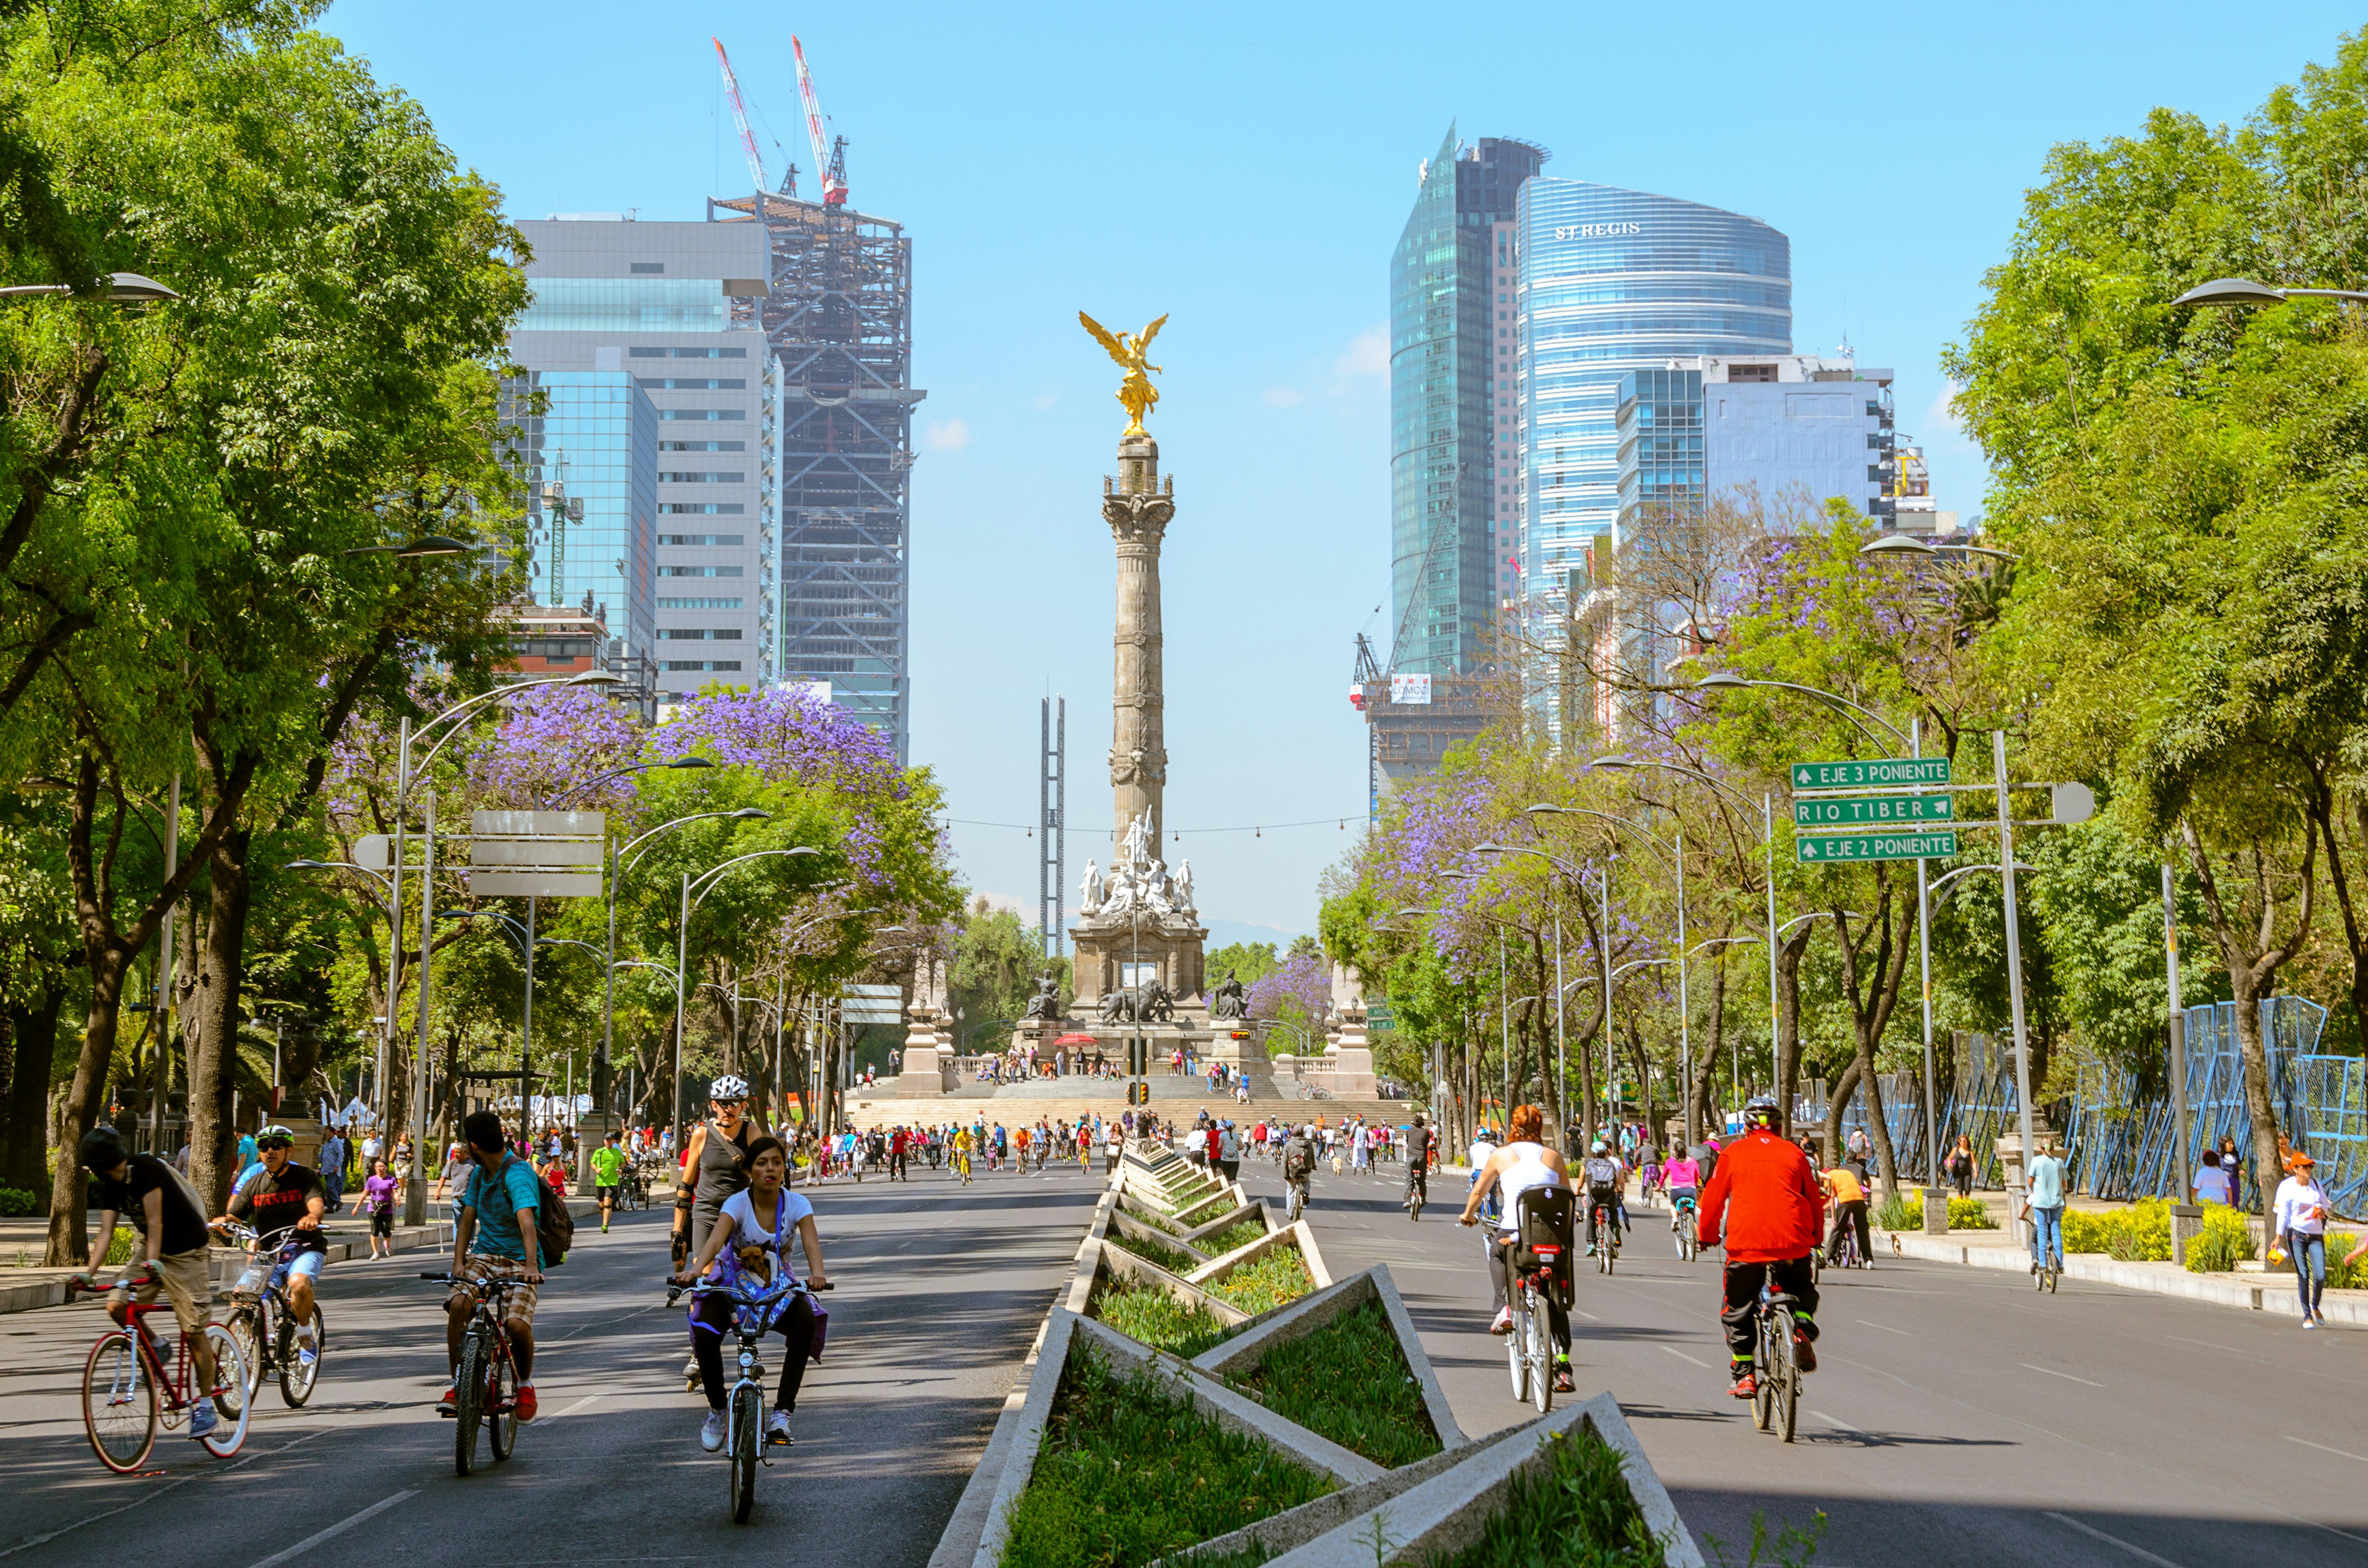 Paseo de la Reforma: a road in central Mexico City that has been closed to traffic. People cycle bicycles on either side of the road, which is flanked by trees.